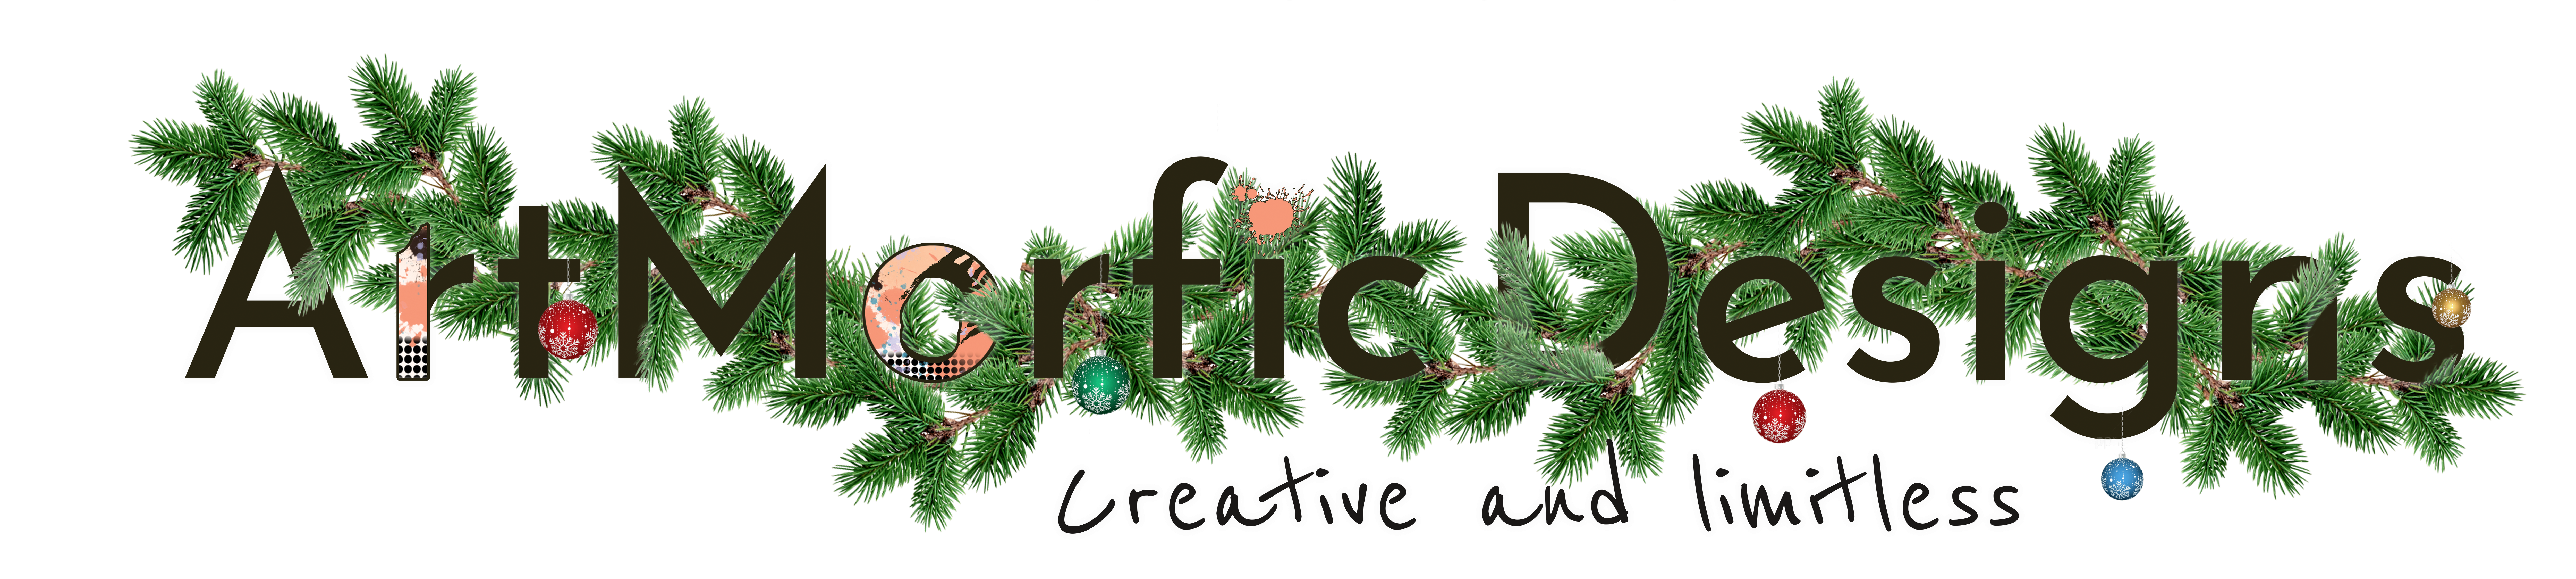 ArtMorfic Designs - Artistic Gifts, Apparel, Merchandise and Art Resources for Creative People